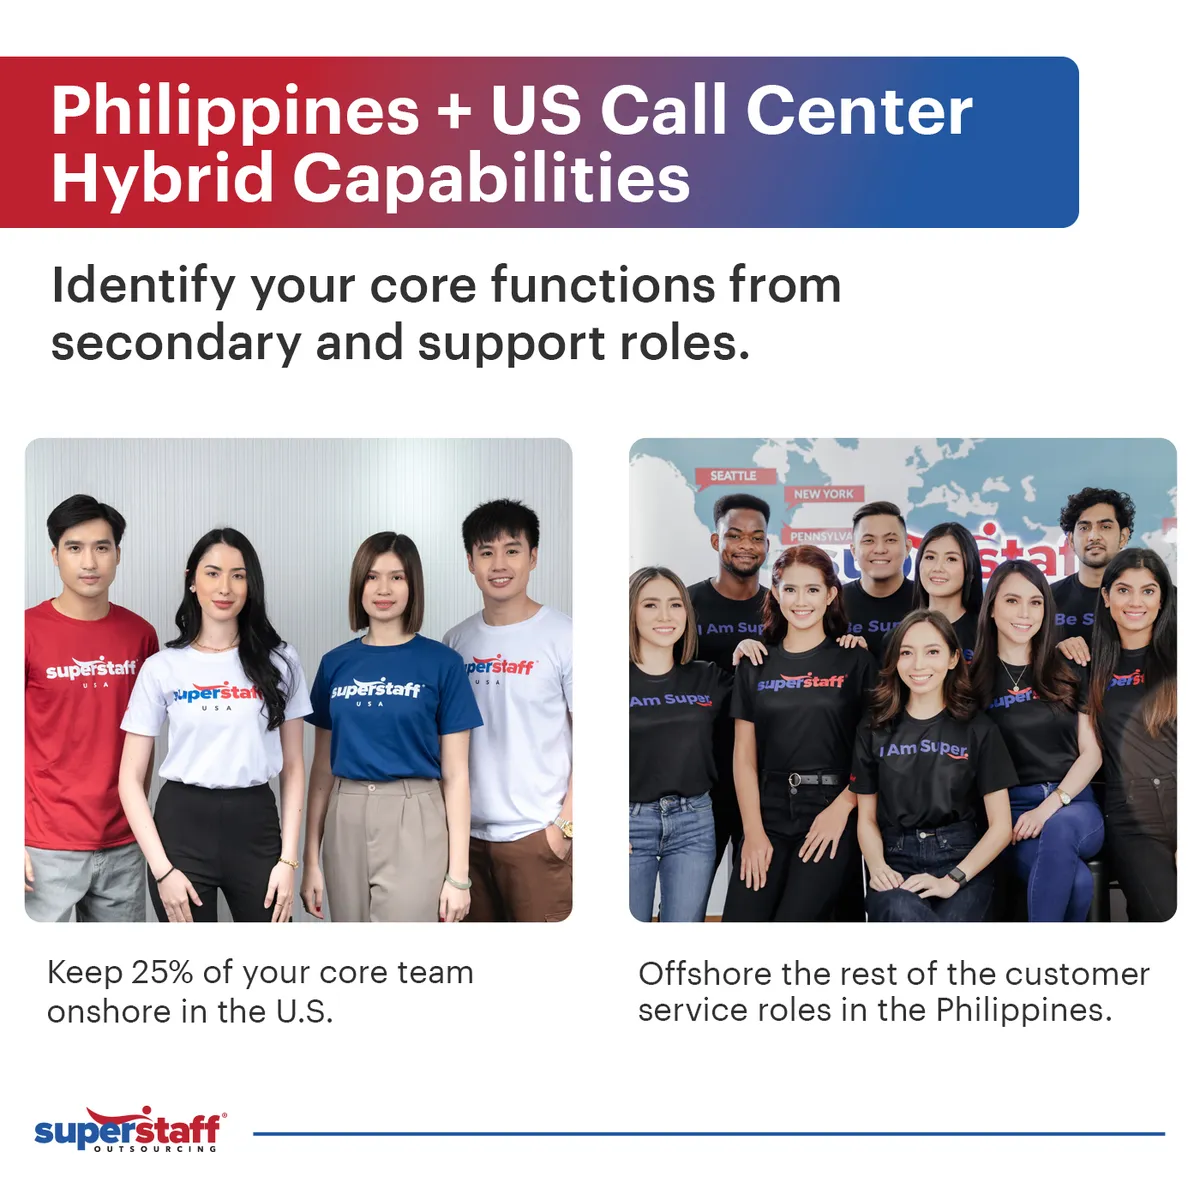 A mini infographic shows a hybrid outsourcing strategy blending U.S. + Philippines call center services